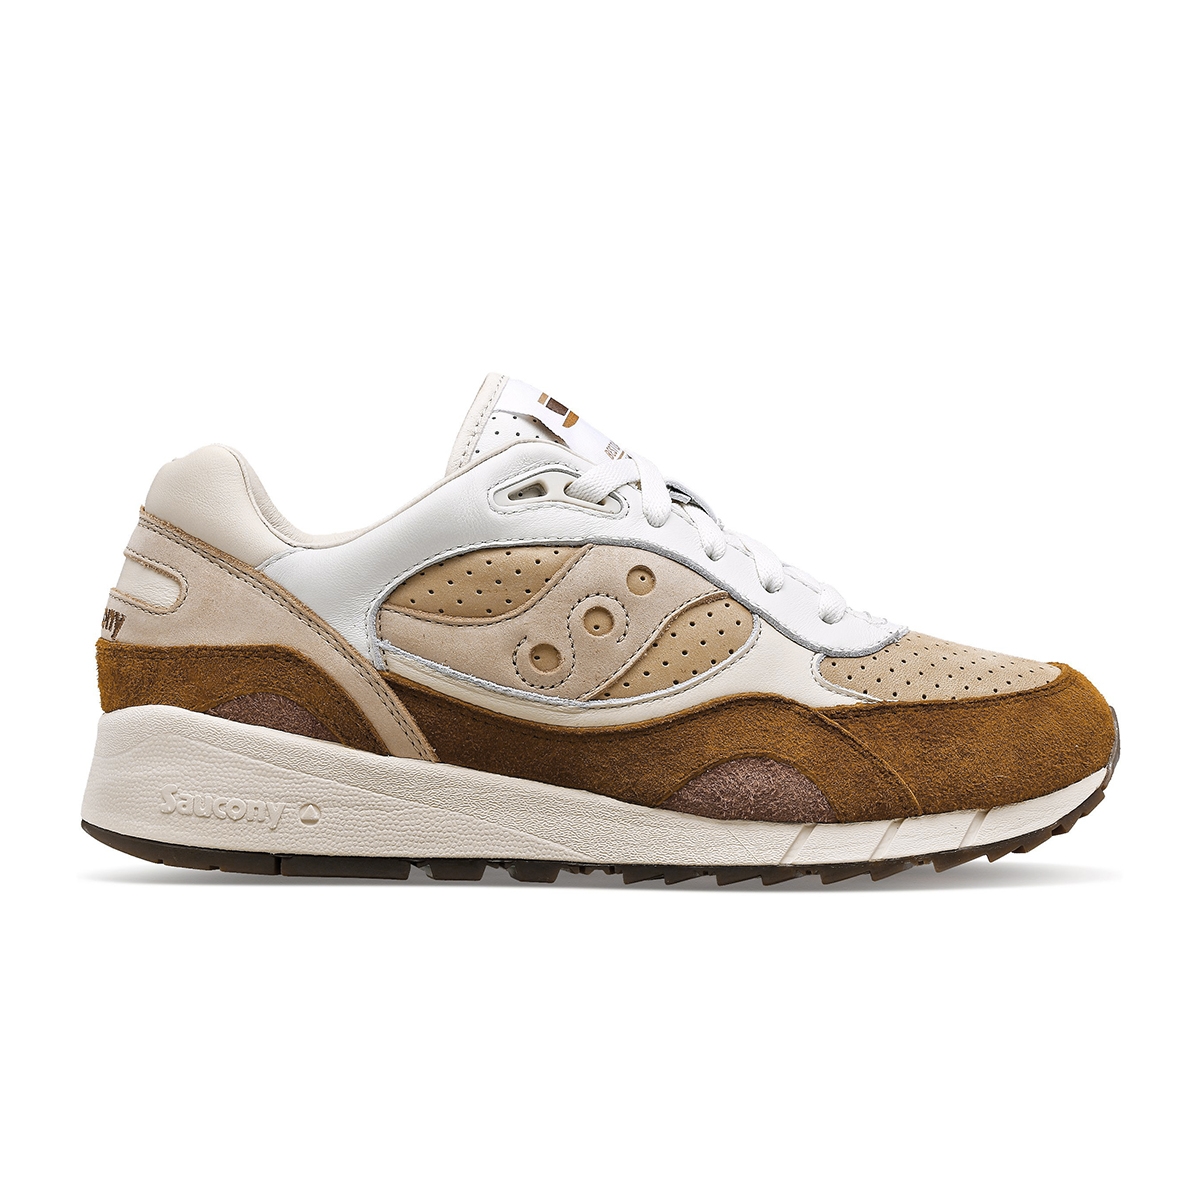 Shadow 6000 - Coffee Time - Brown White